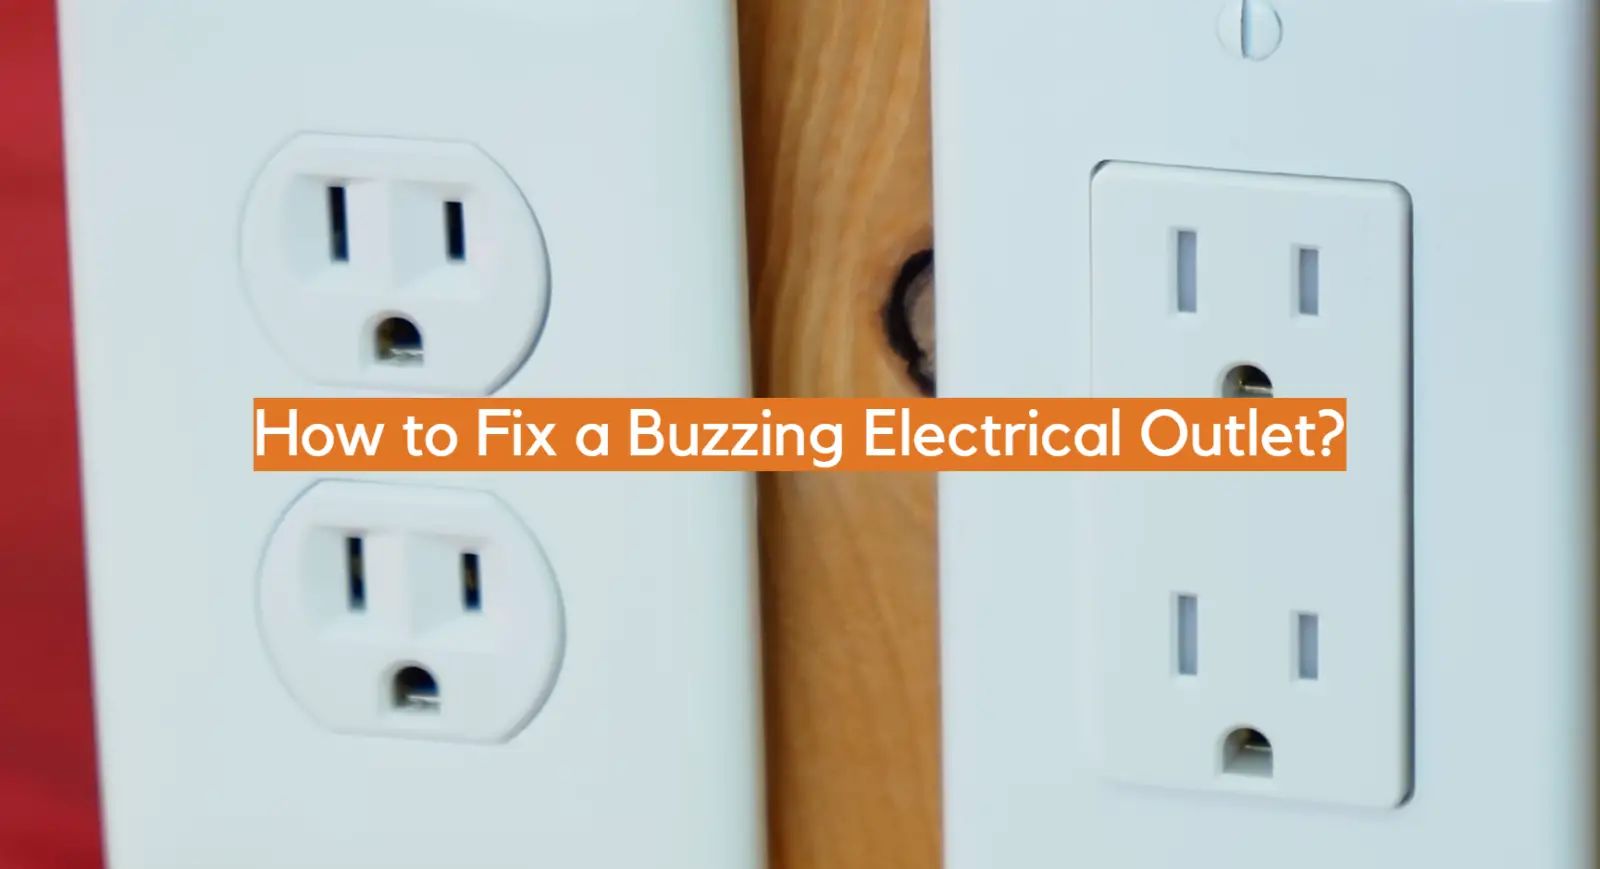 How to Fix a Buzzing Electrical Outlet?